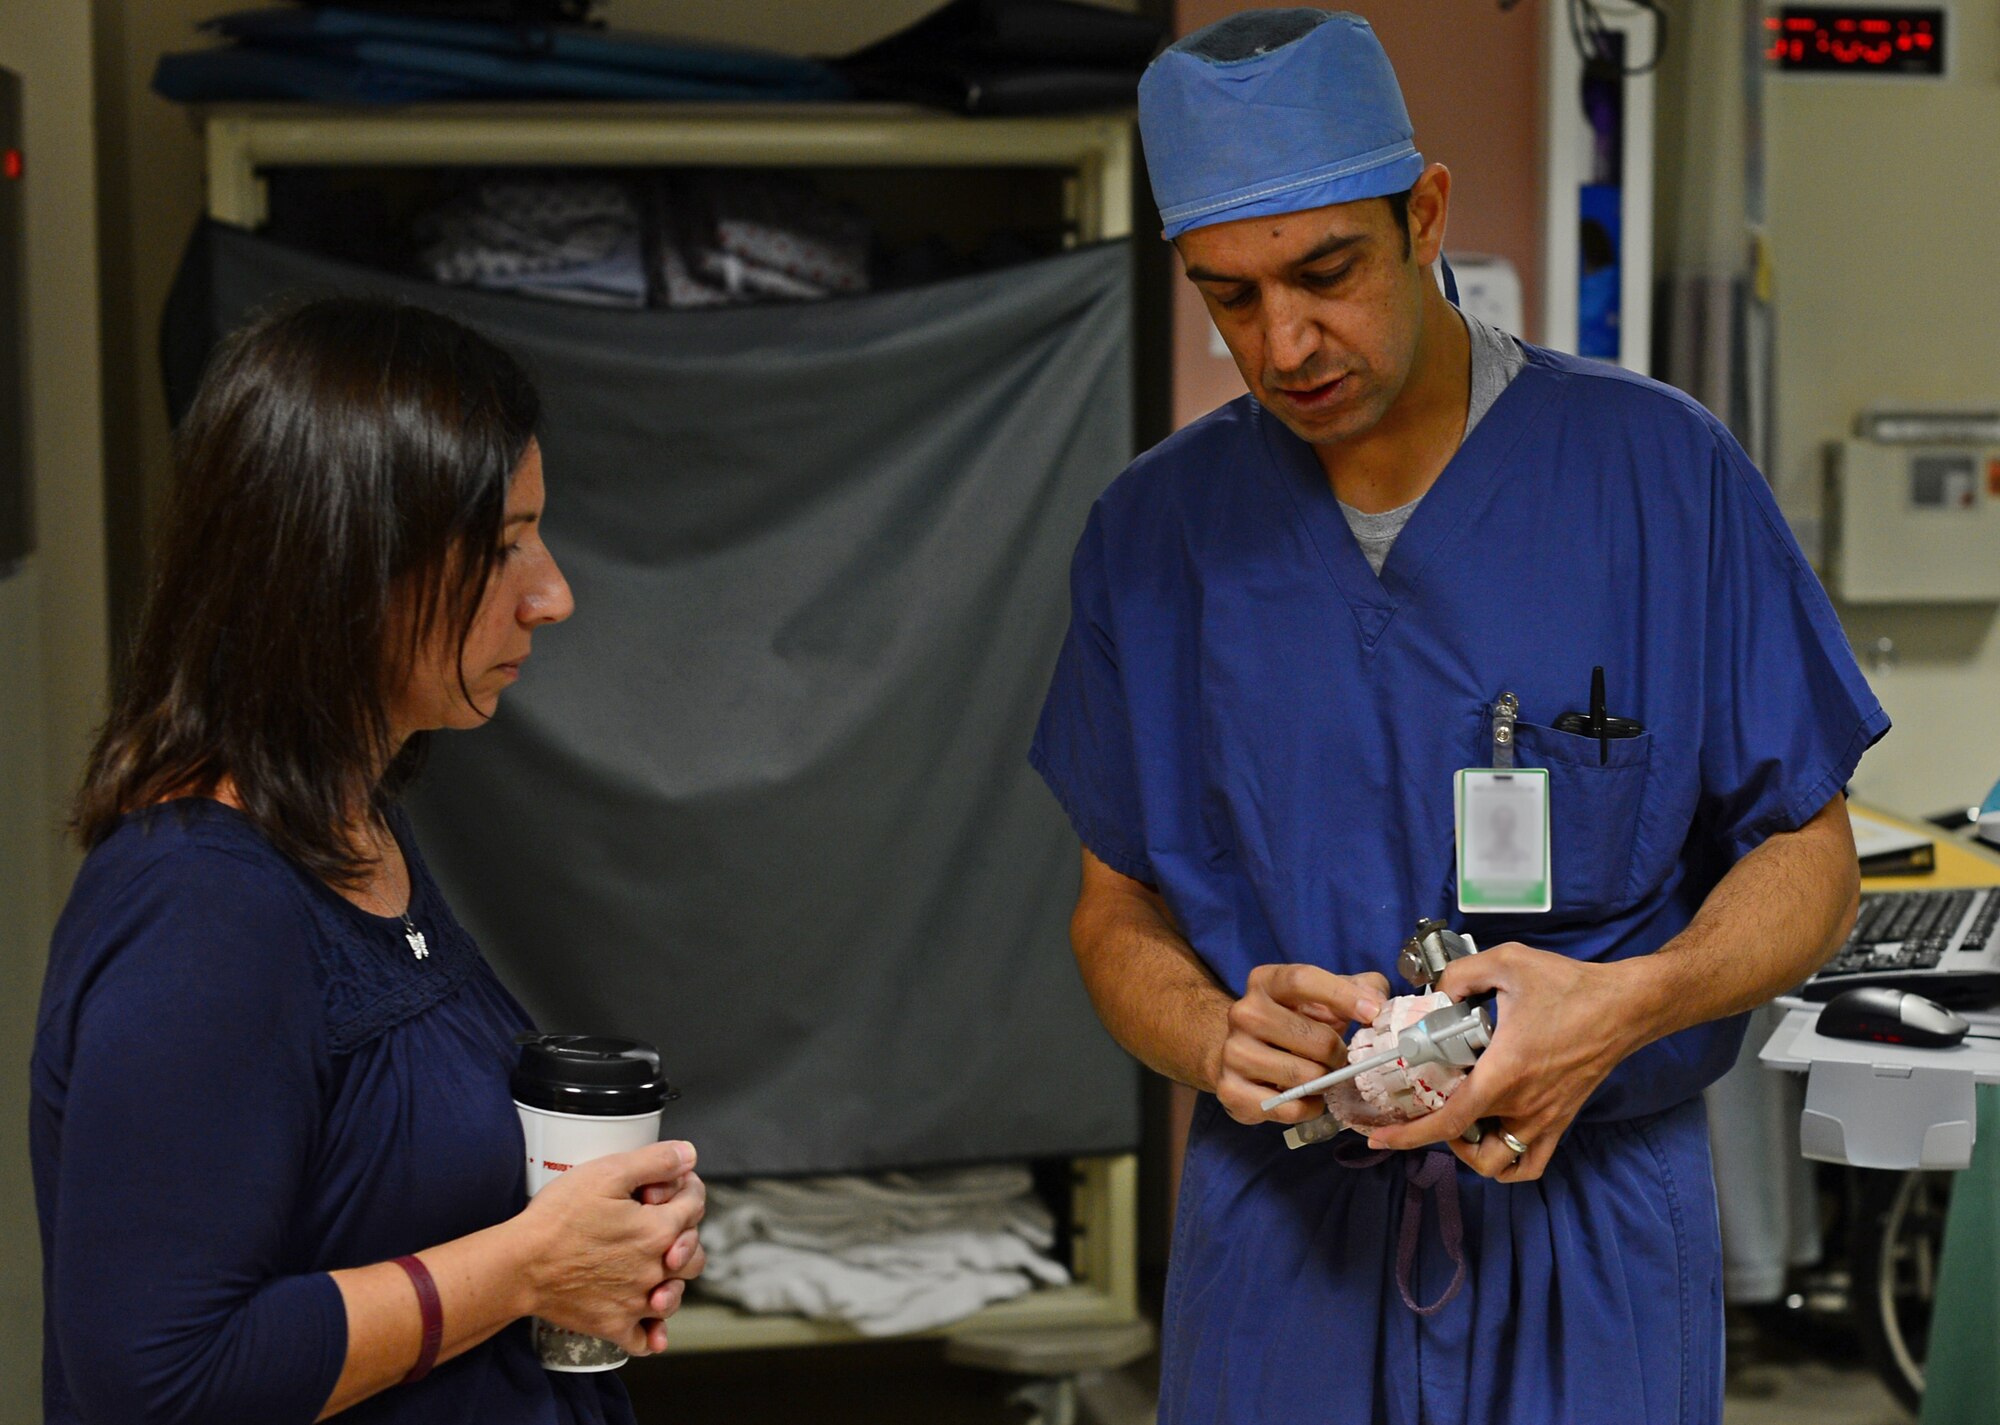 Lt. Col. Khurram Shahzad, 48th Dental Squadron oral maxillofacial surgeon, shows a jaw anatomy model to Dawn McBride, the mother of a patient undergoing dental facial defomrity surgery, in the hospital at Royal Air Force Lakenheath, England, July 9, 2015. Maxillofacial surgeons perform the tasks of both plastic surgeons and dentists, and perform hundreds of surgeries each year. (U.S. Air Force photo by Senior Airman Erin O’Shea/Released) 